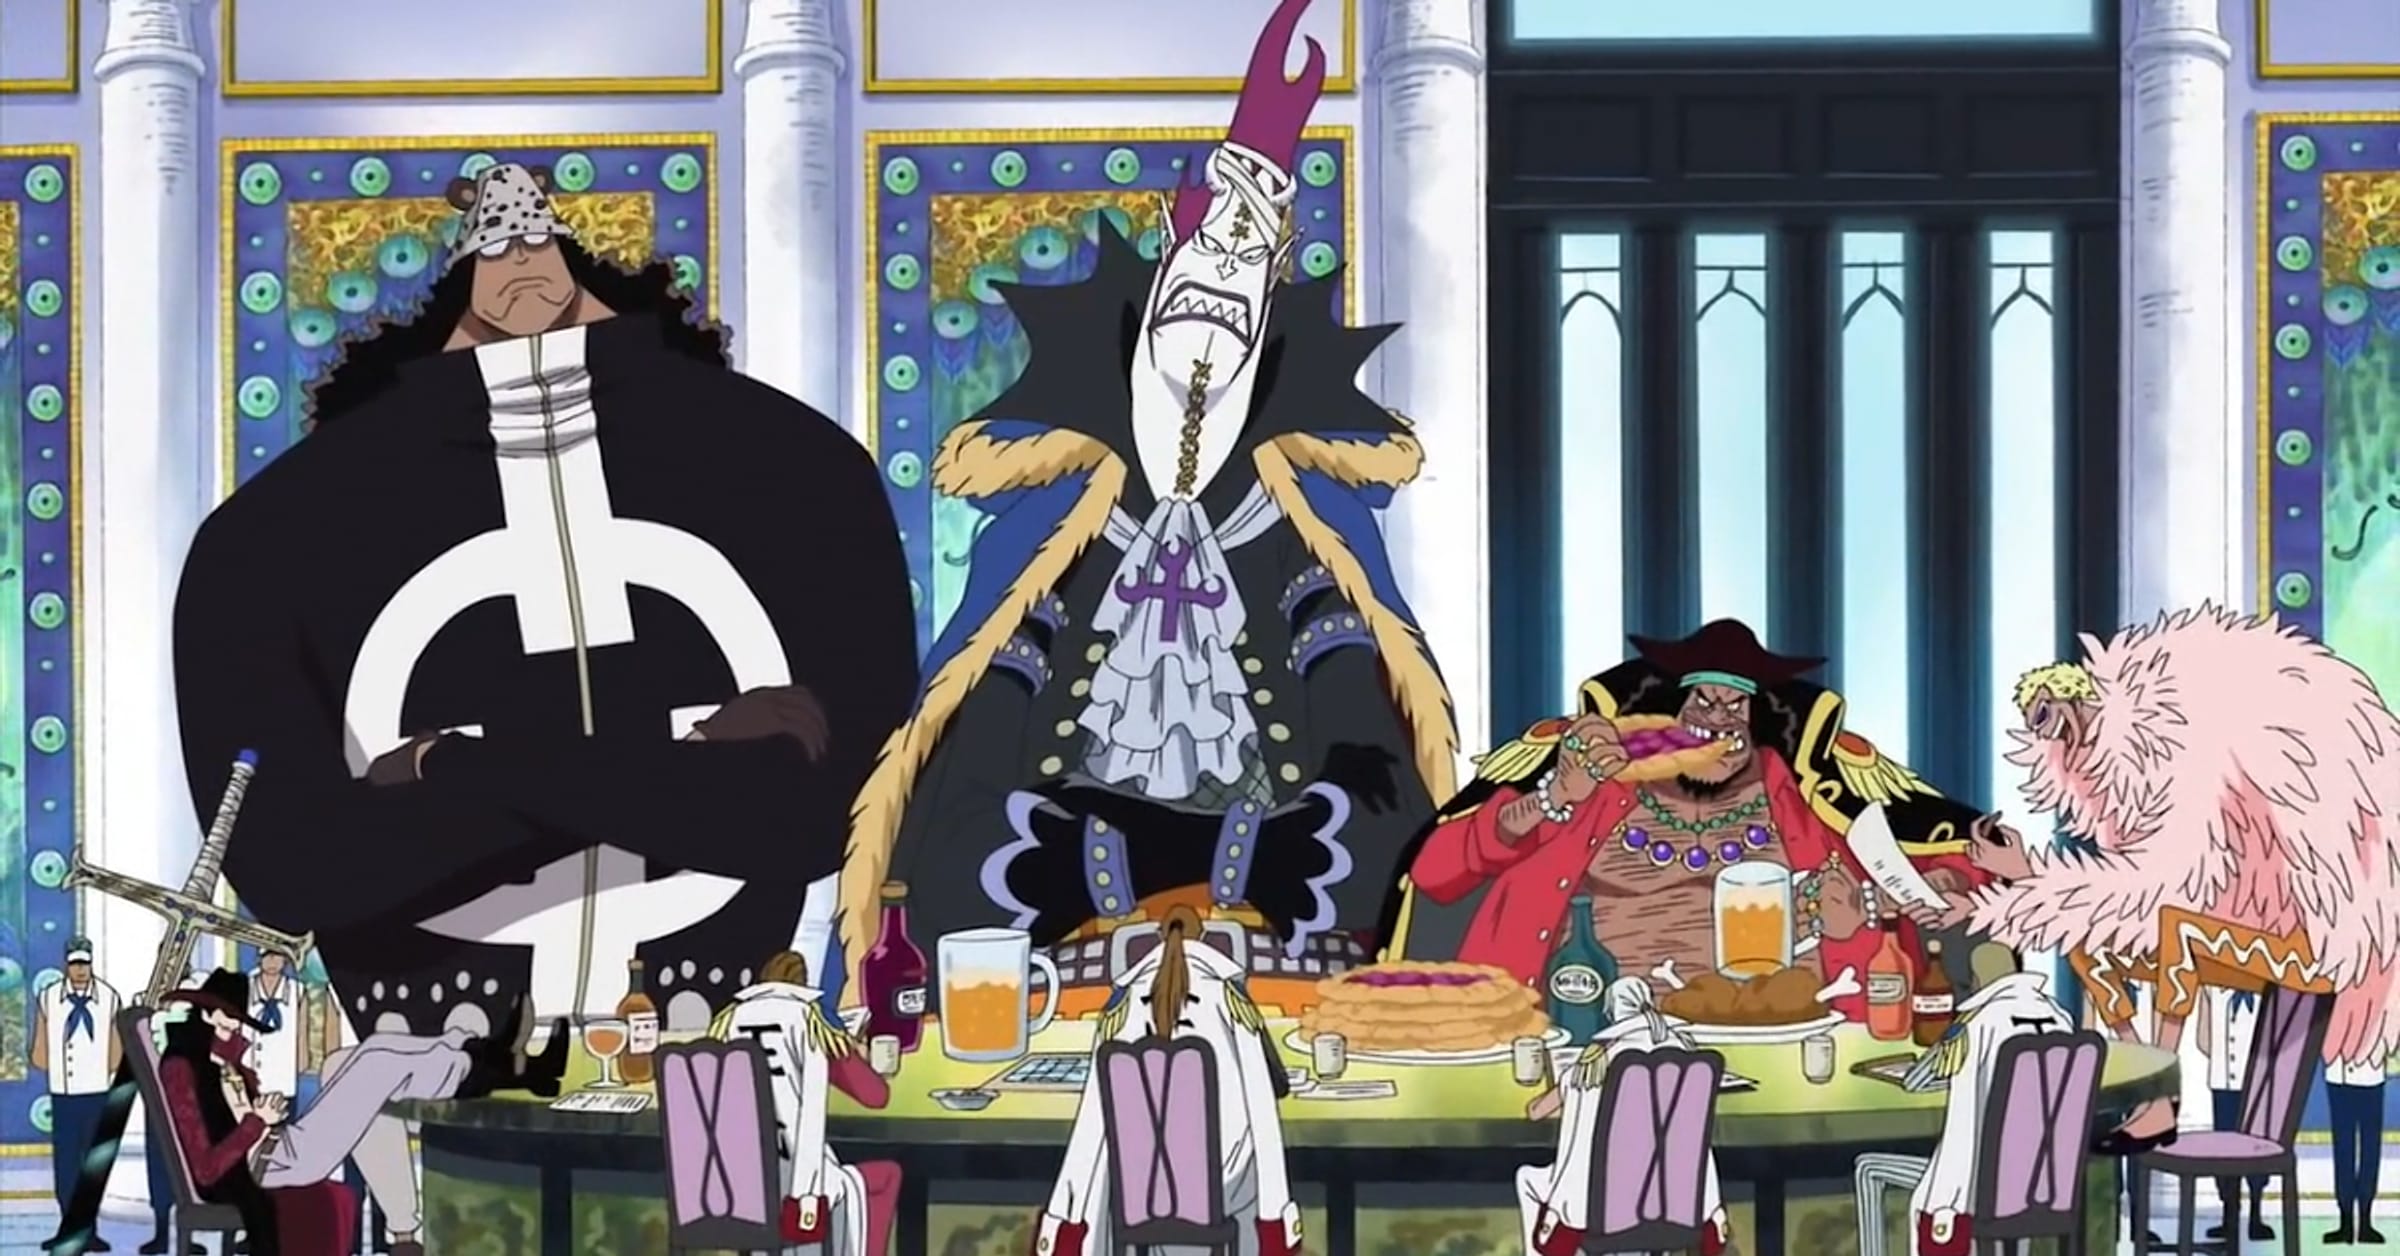 One Piece: Every major villain who appeared in live-action ranked